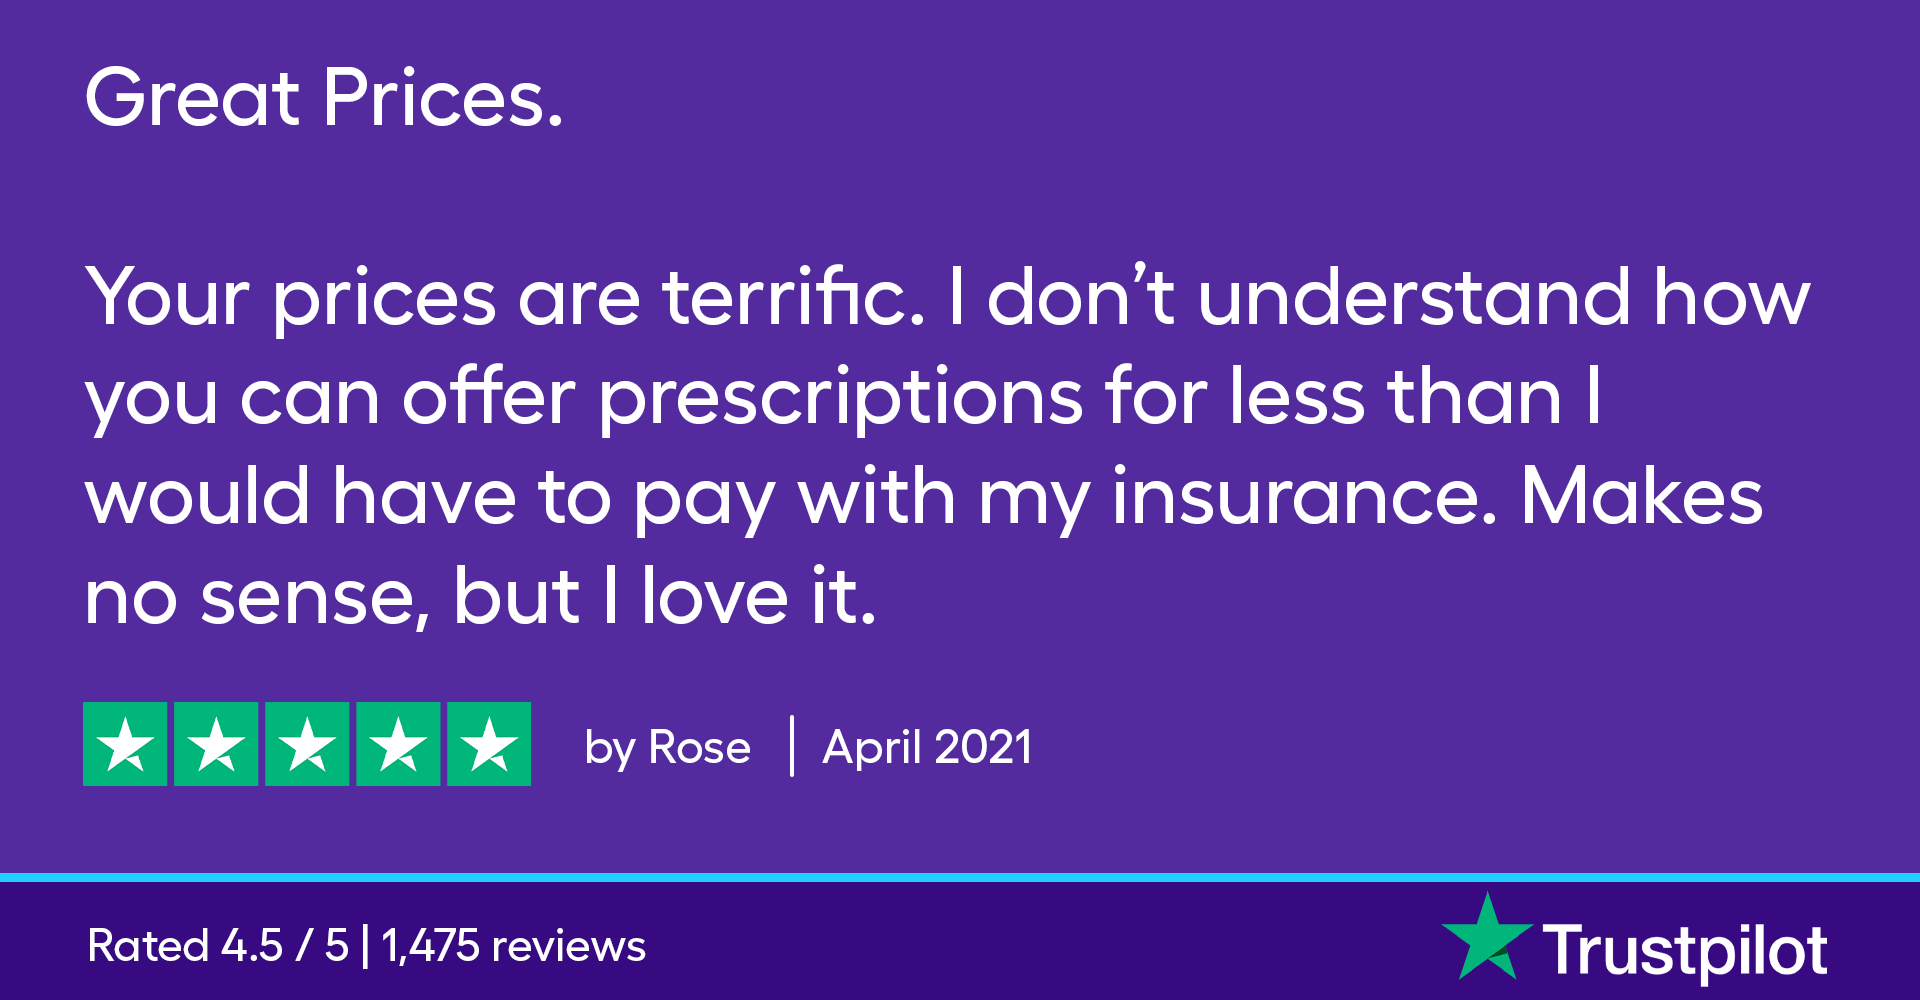 Your prices are terrific. I don’t understand how you can offer prescriptions for less than I would have to pay with my insurance. Makes no sense, but I love it. 